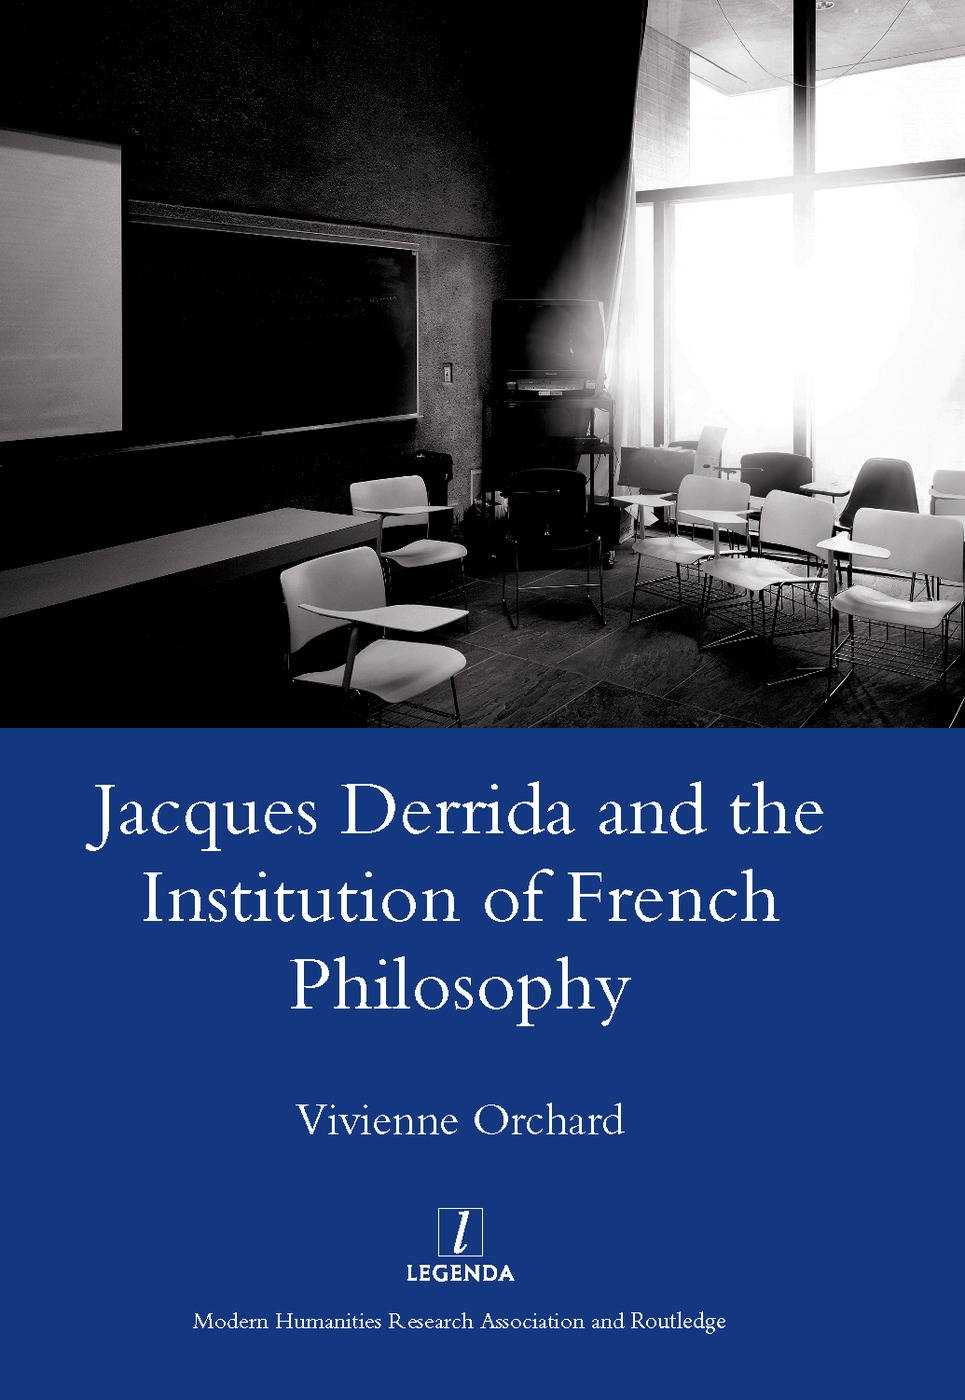 Jacques Derrida and the Institution of French Philosophy